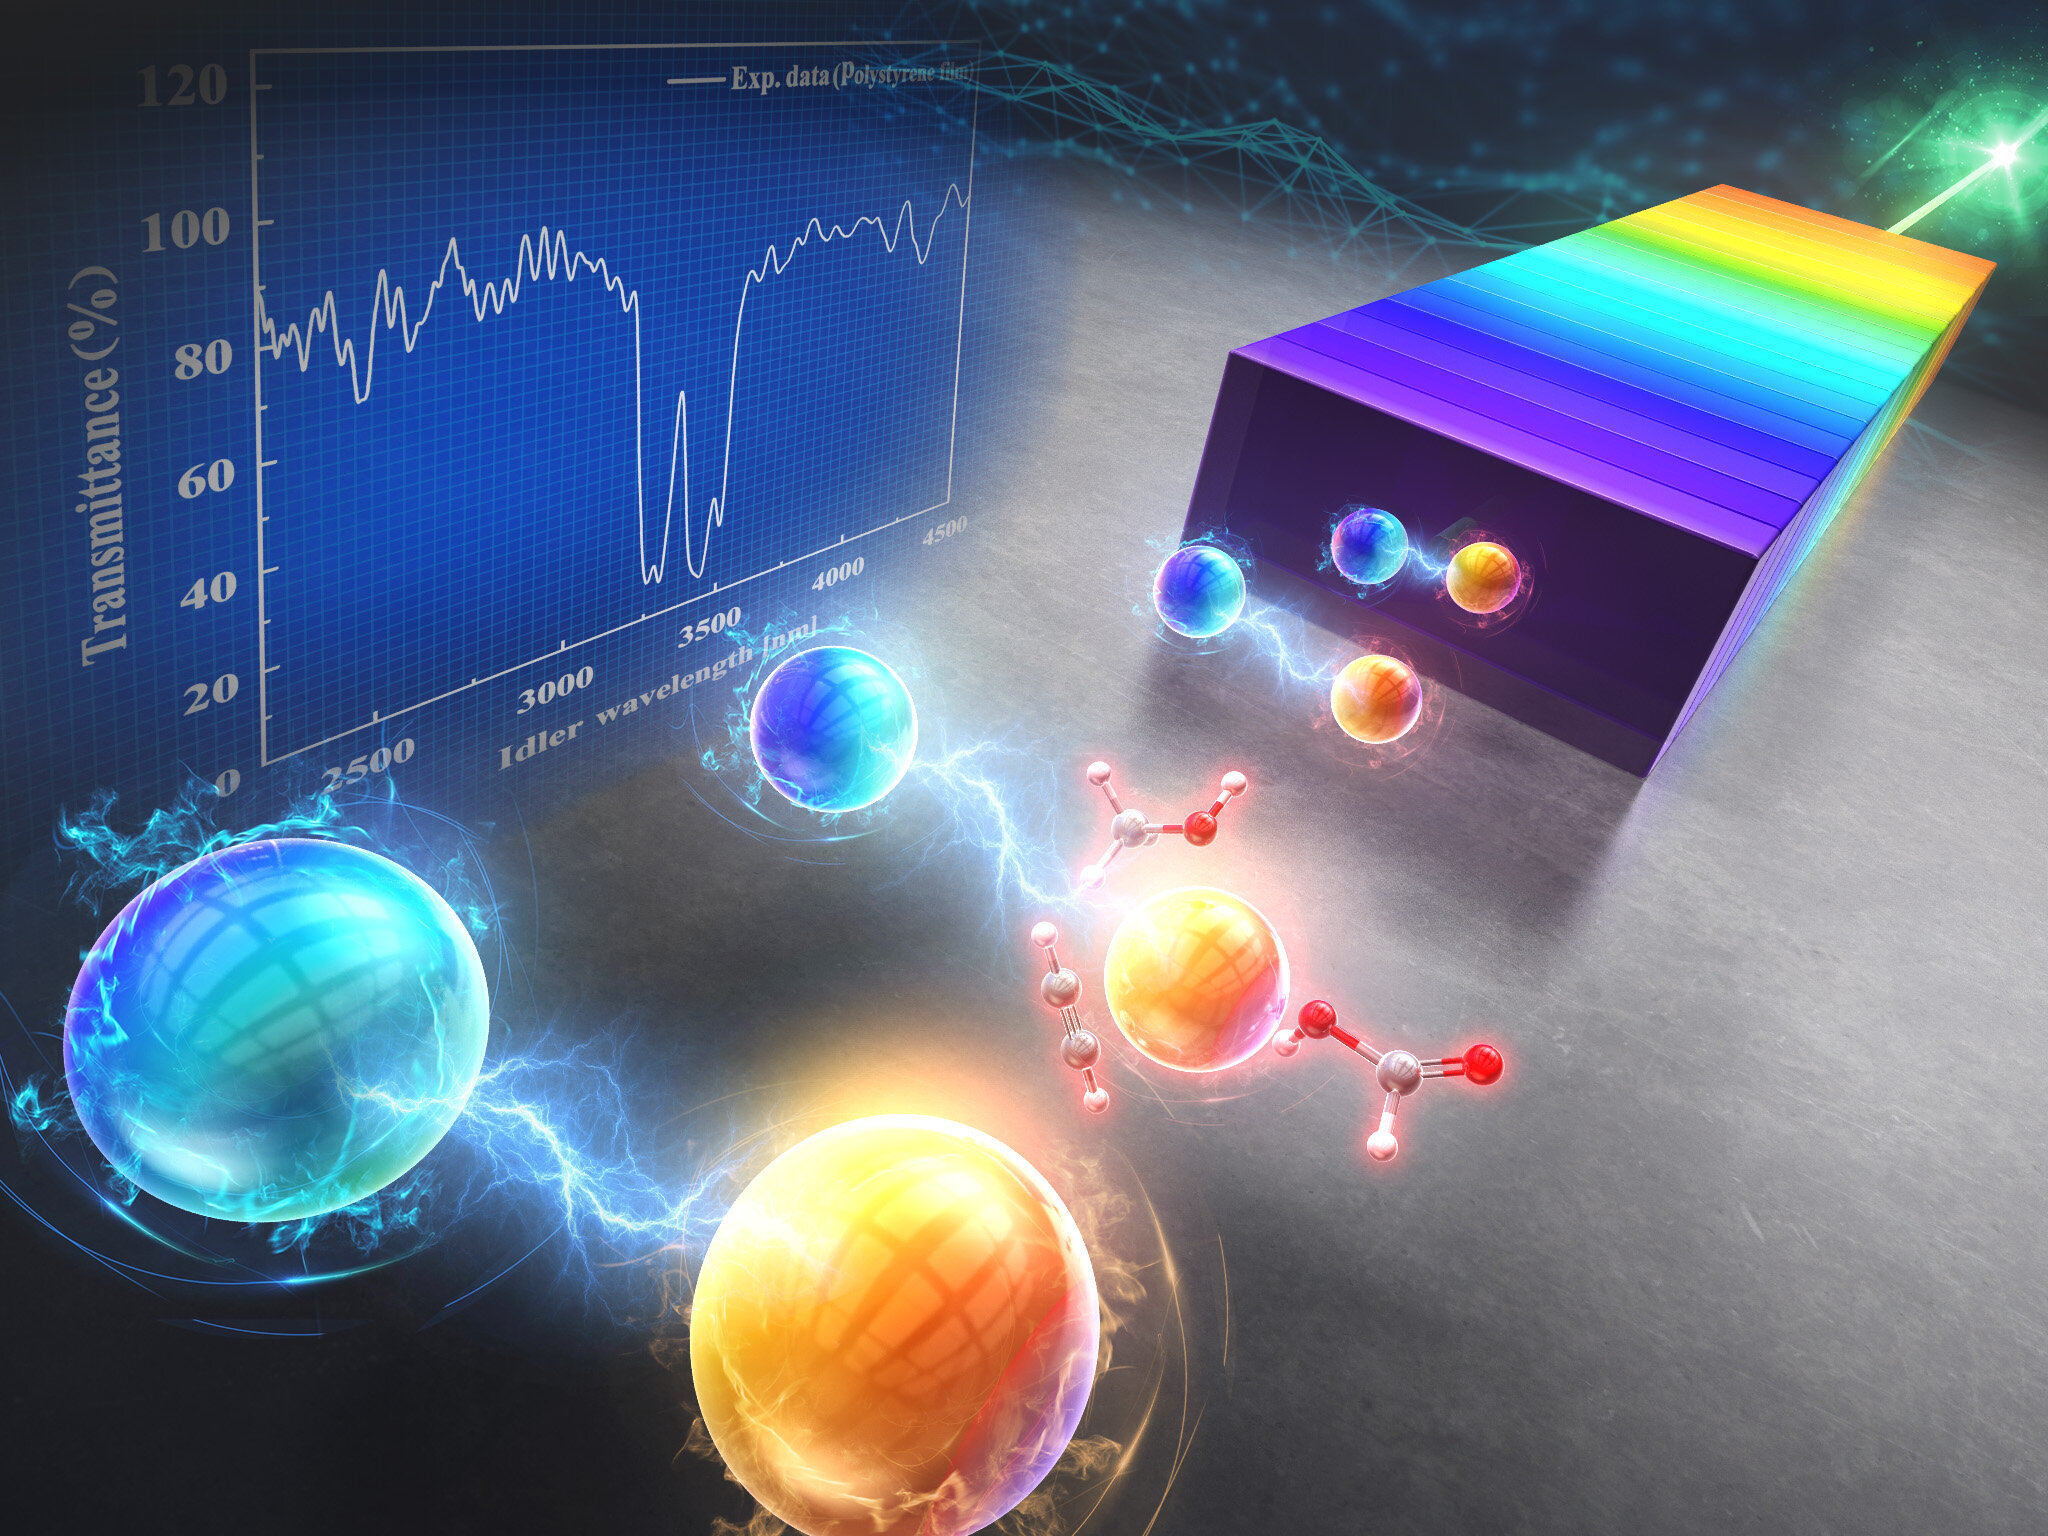 Scientists show that quantum infrared spectroscopy can achieve